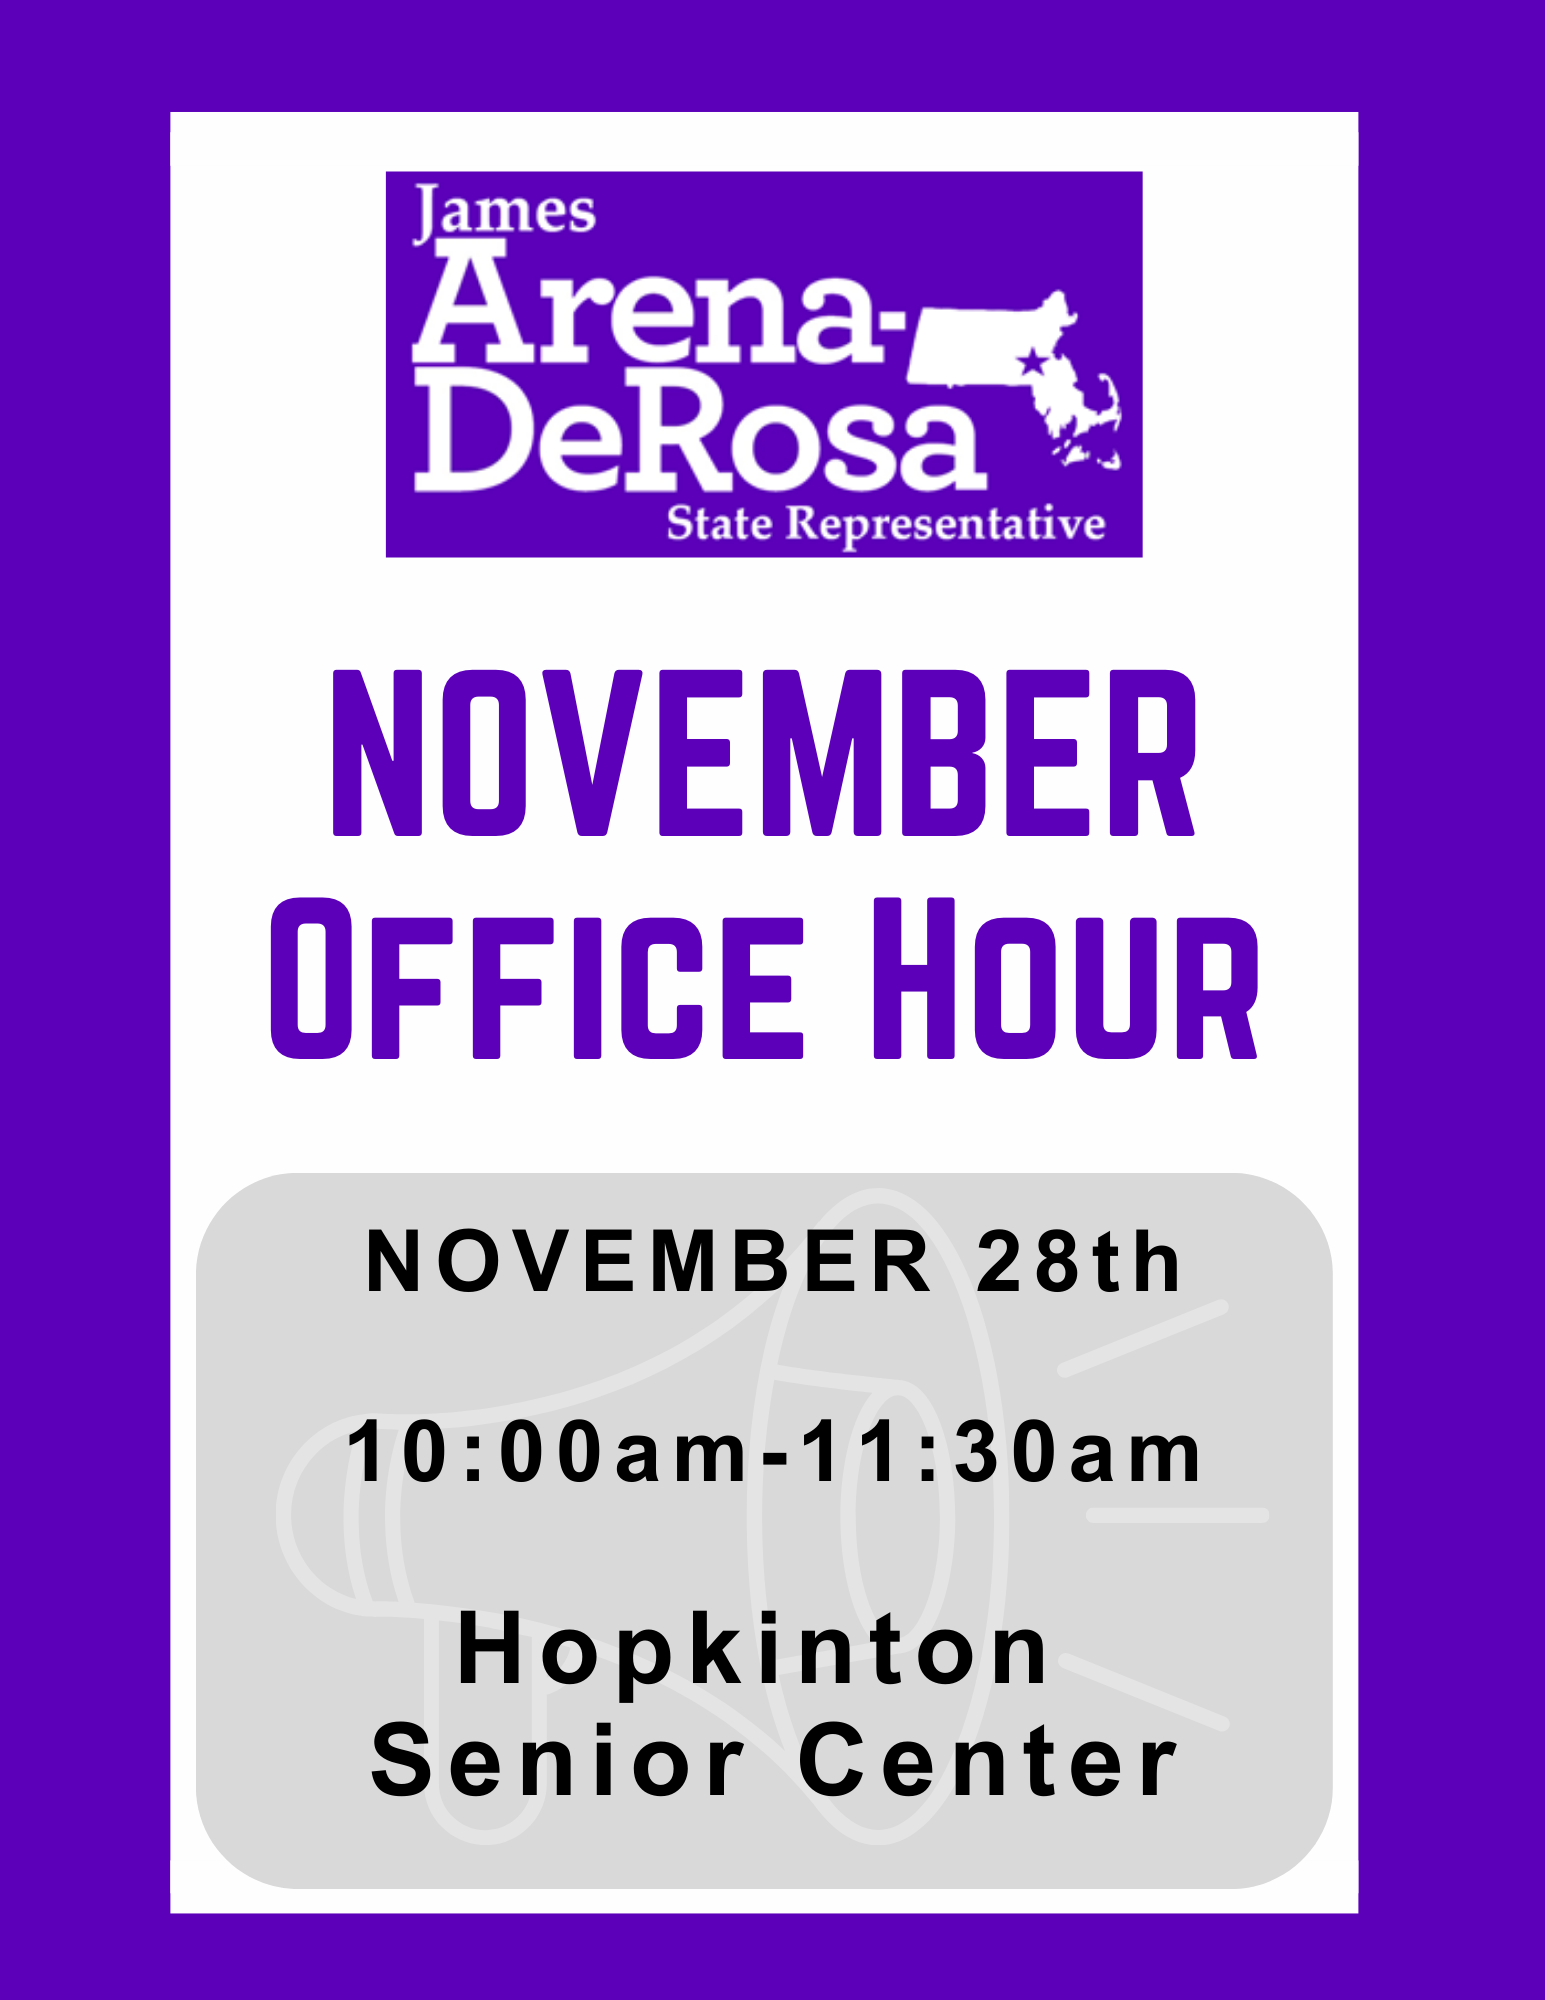 State Rep. Arena-DeRosa to hold office hours at Senior Center Nov. 28